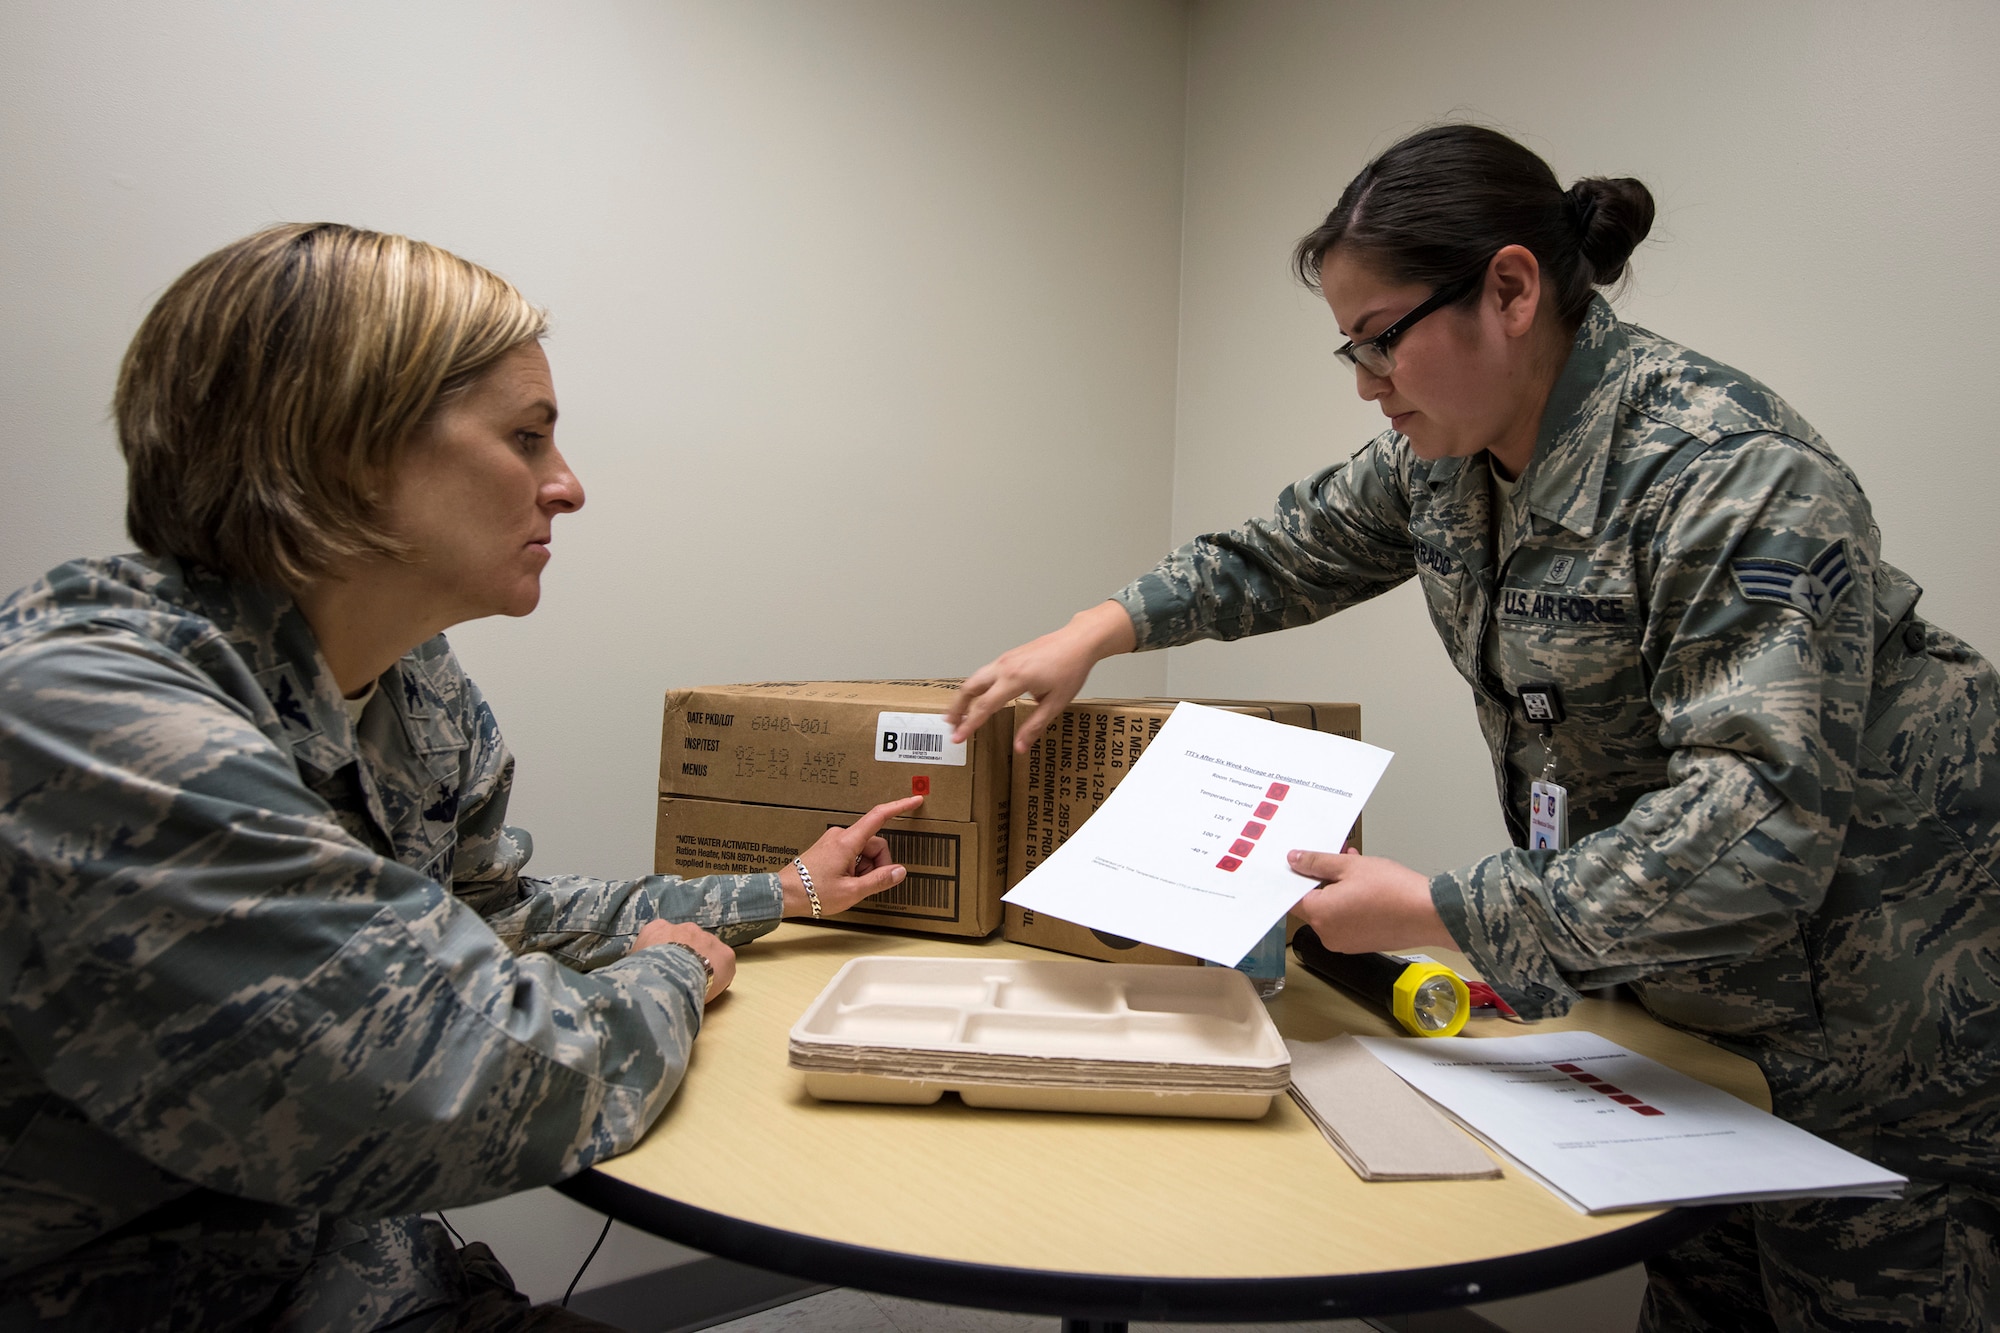 Col. Jennifer Short, left, 23d Wing commander, and Senior Airman Evelyn Alvarado, 23d Aerospace Medicine Squadron public health technician, perform an inspection on a meal, ready-to-eat, April 30, 2018, at Moody Air Force Base, Ga.  Short toured the 23d Medical Group (MDG) to gain a better understanding of their overall mission, capabilities, and comprehensive duties, and was able to experience the day-to-day operations of the various units within the 23d MDG, ranging from bioenvironmental to ambulatory care. (U.S. Air Force photo by Airman 1st Class Eugene Oliver)